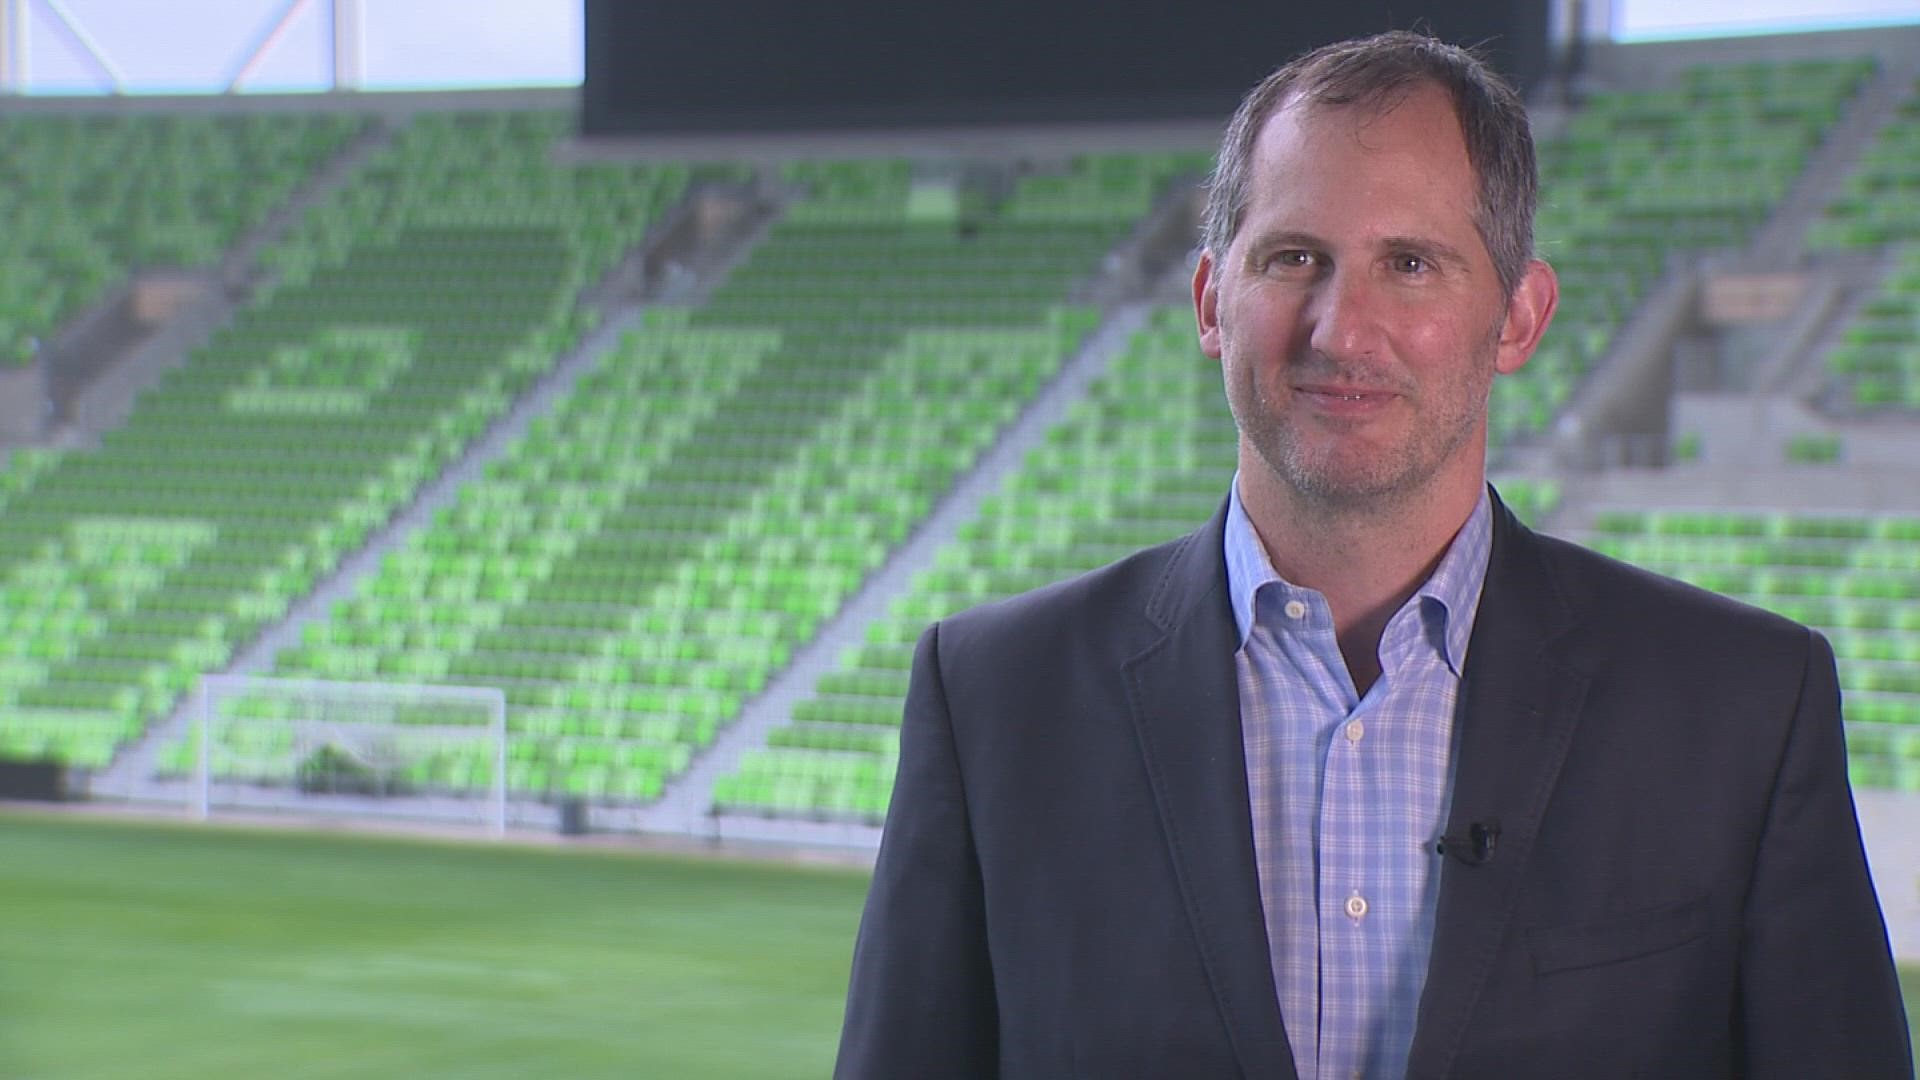 Austin FC President Andy Loughnane gives KVUE an exclusive one-on-one interview about the upcoming 2022 season.